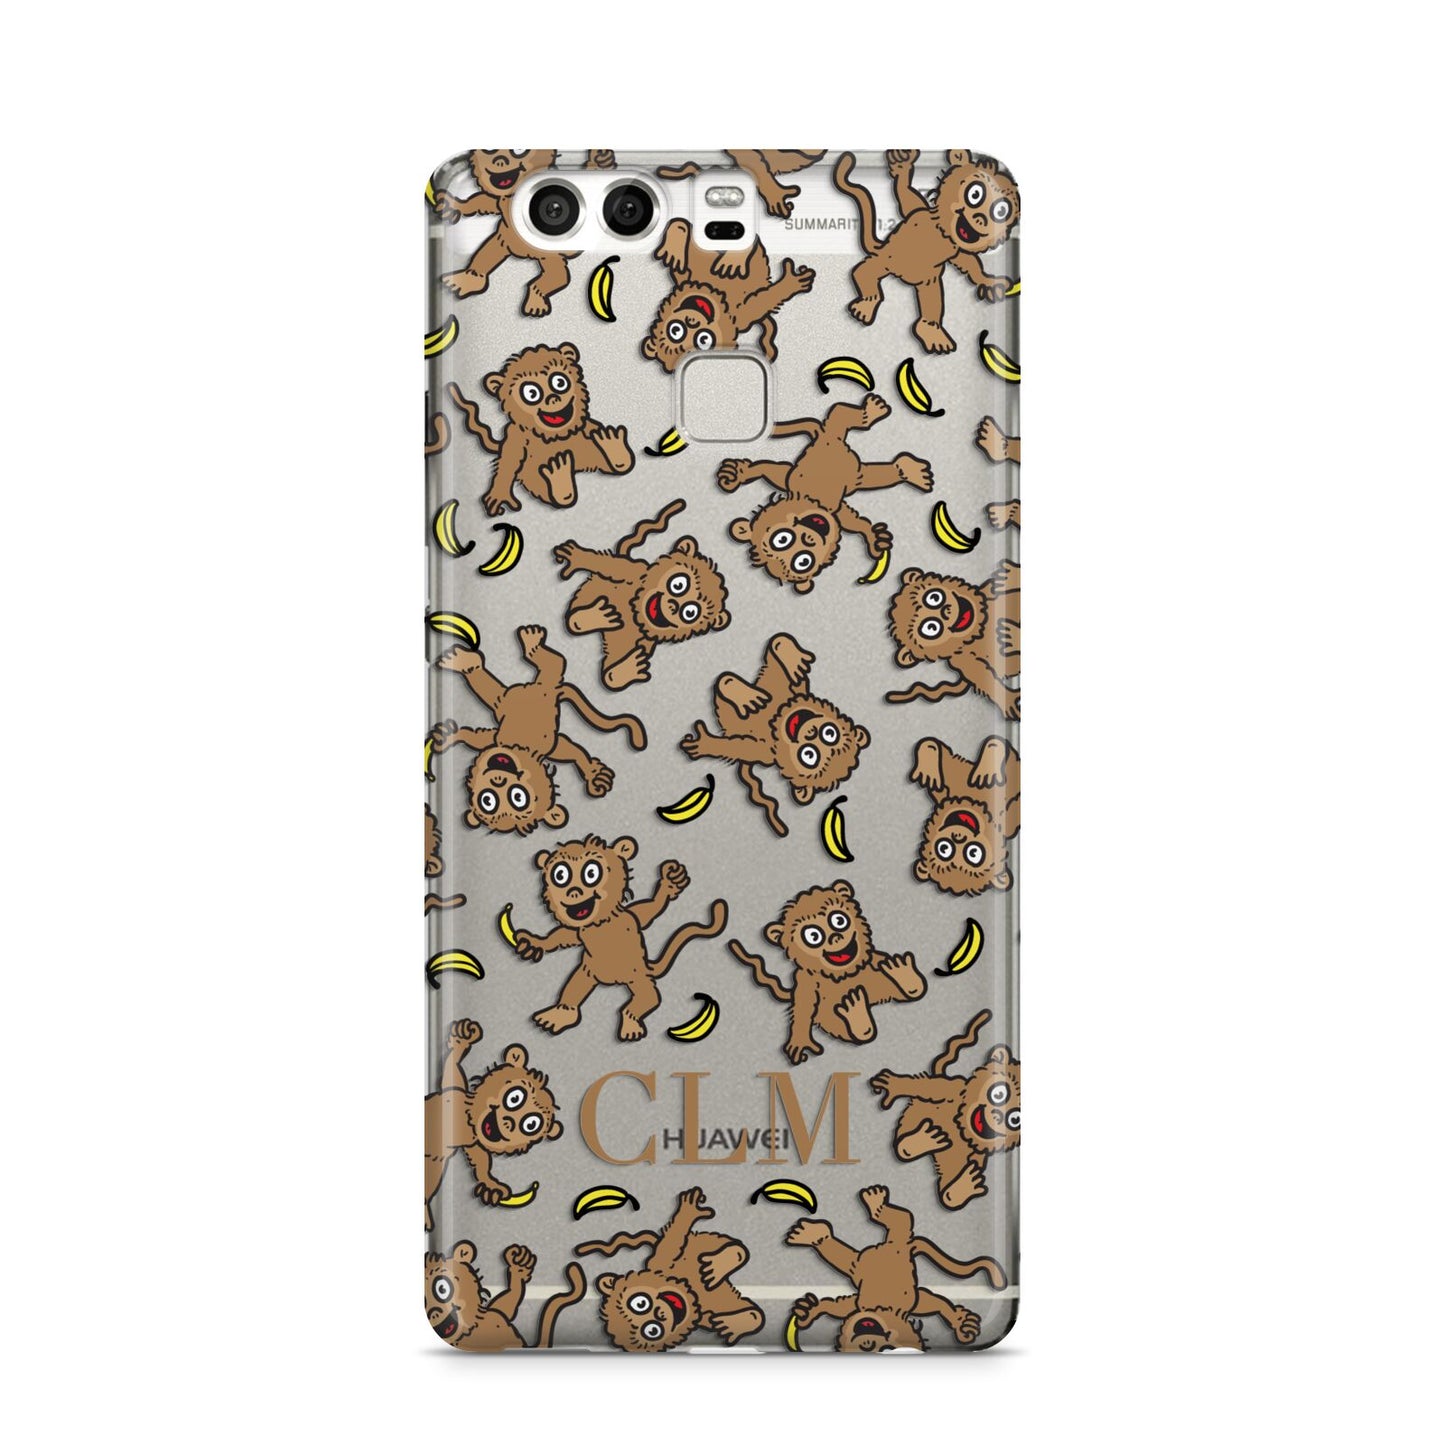 Personalised Monkey Initials Huawei P9 Case